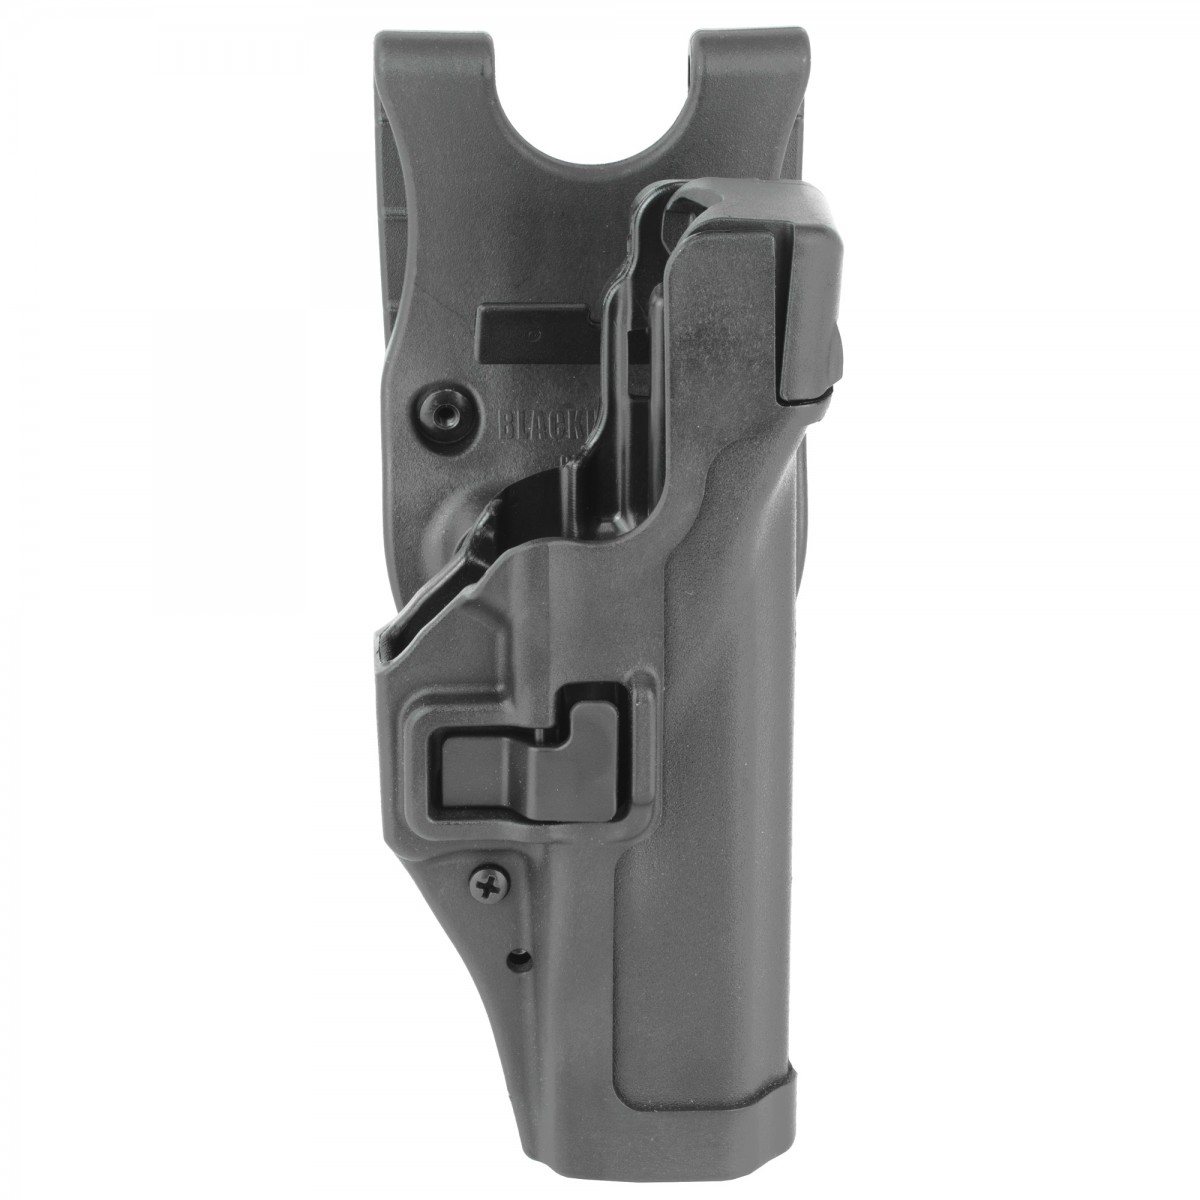 TACTICAL HOLSTER FOR GLOCK - SERPA TACTICAL LEVEL 3 - BLACKHAWK® Glock  17/19/22/22/23/31/32, Shooting Gear \ Holsters , Army  Navy Surplus - Tactical, Big variety - Cheap prices